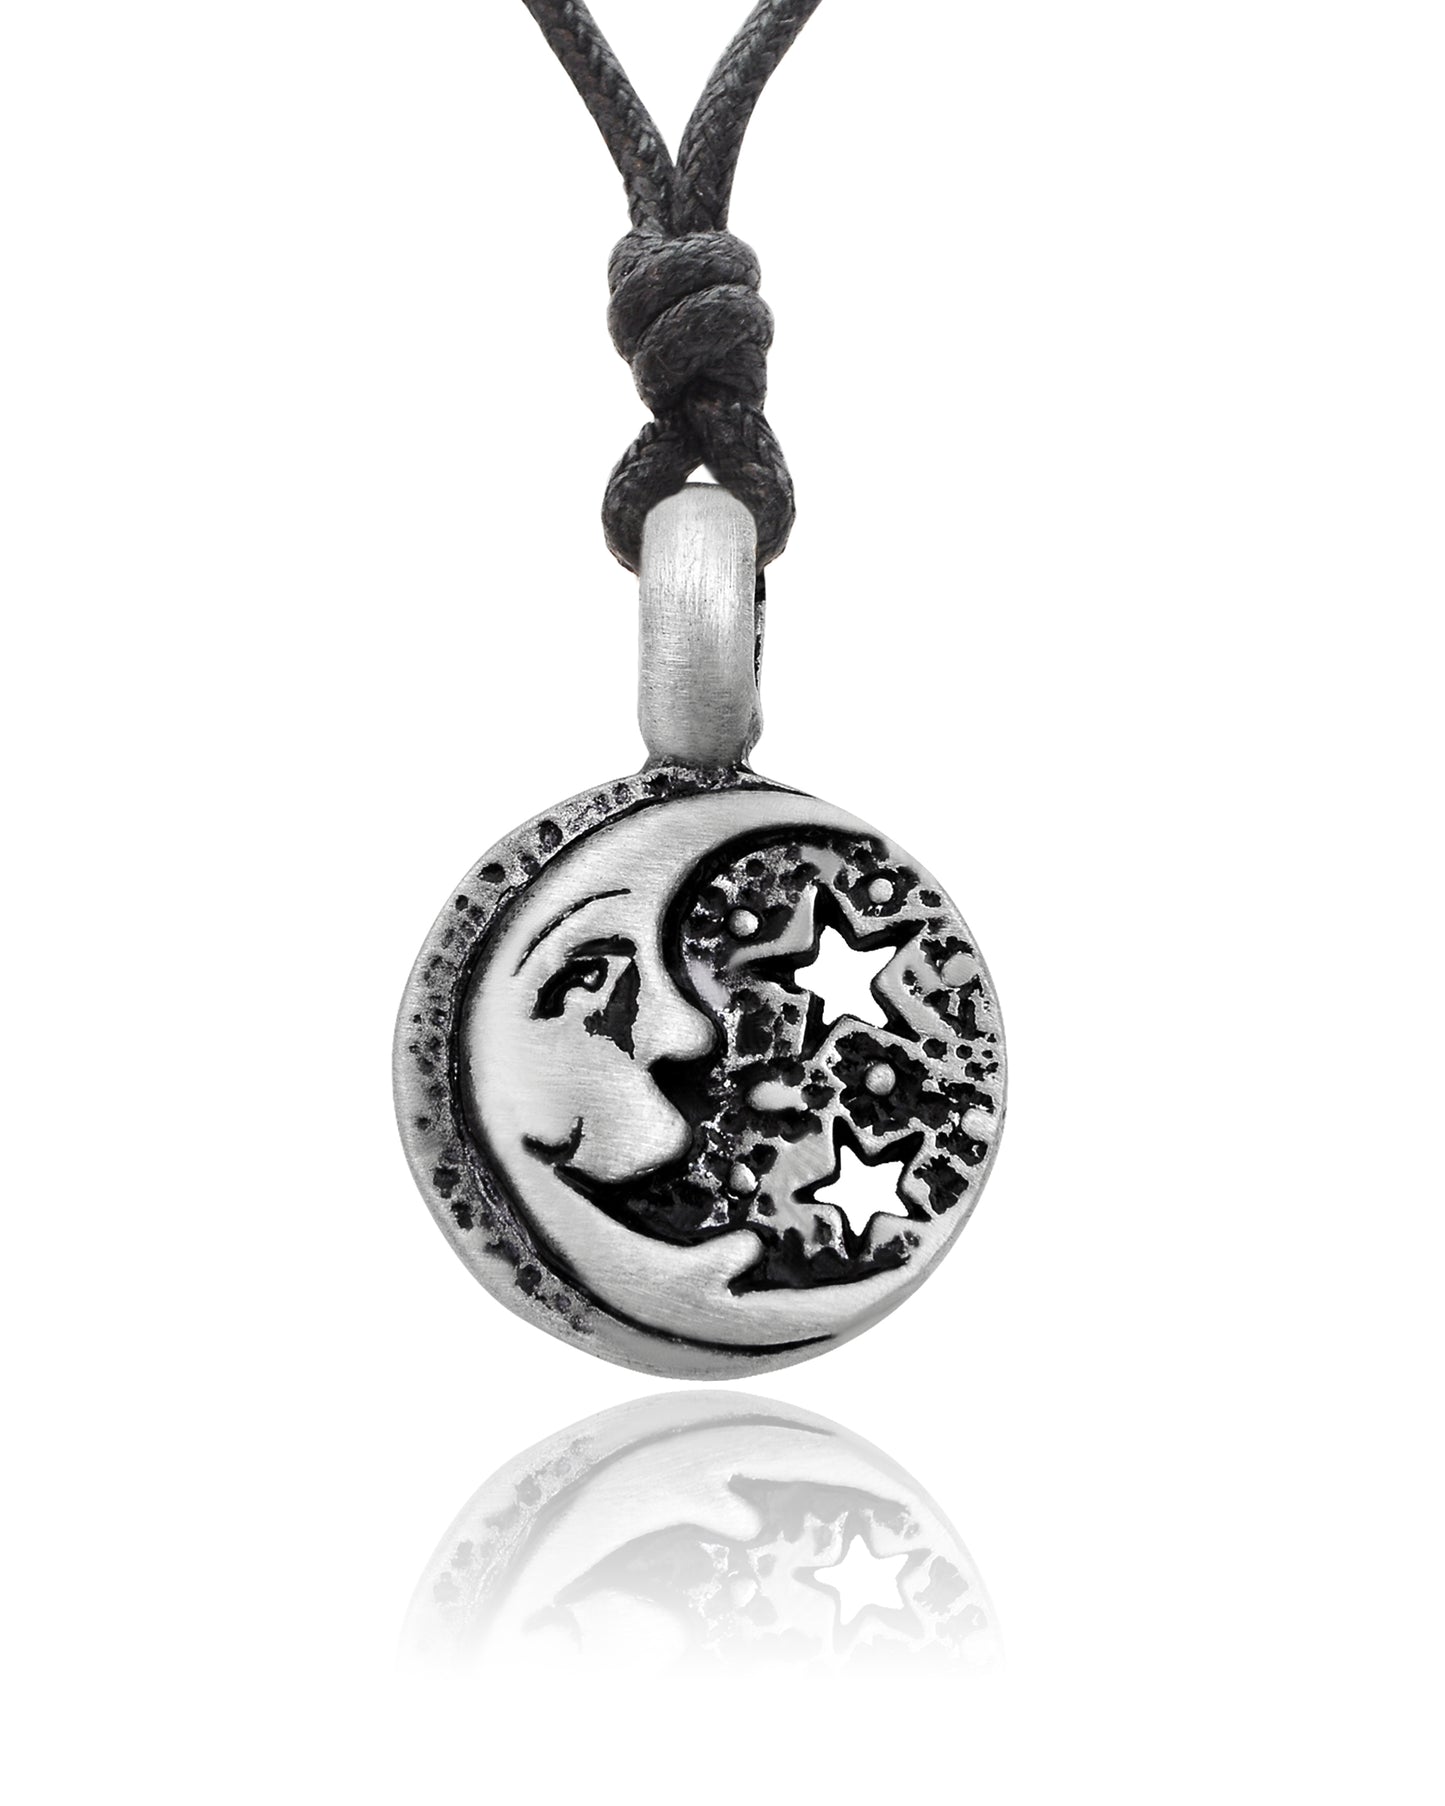 Star and Moon Silver Pewter Charm Necklace Pendant Jewelry